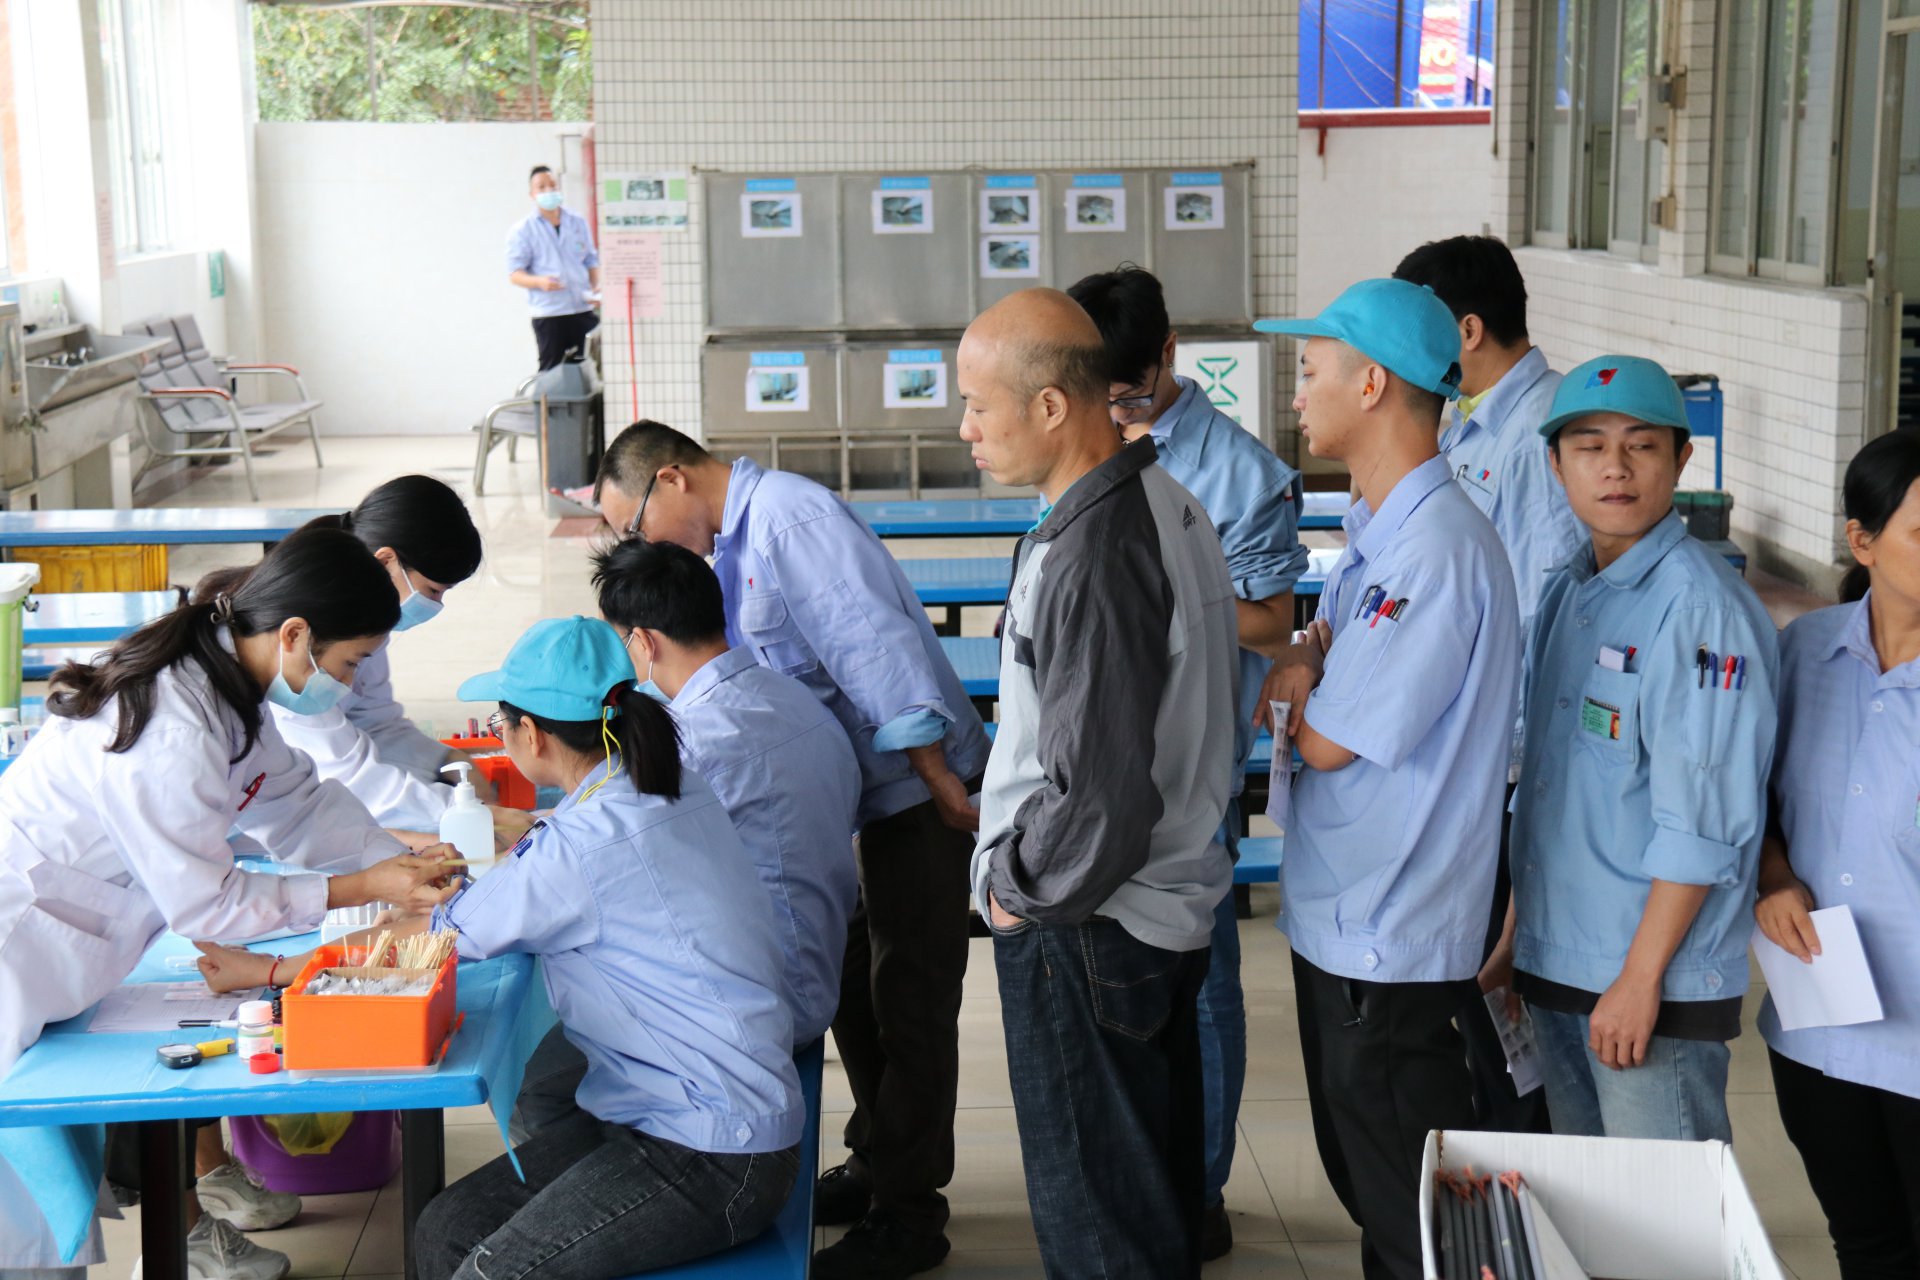 Liyuan carries out physical examination activities to care for employees' health